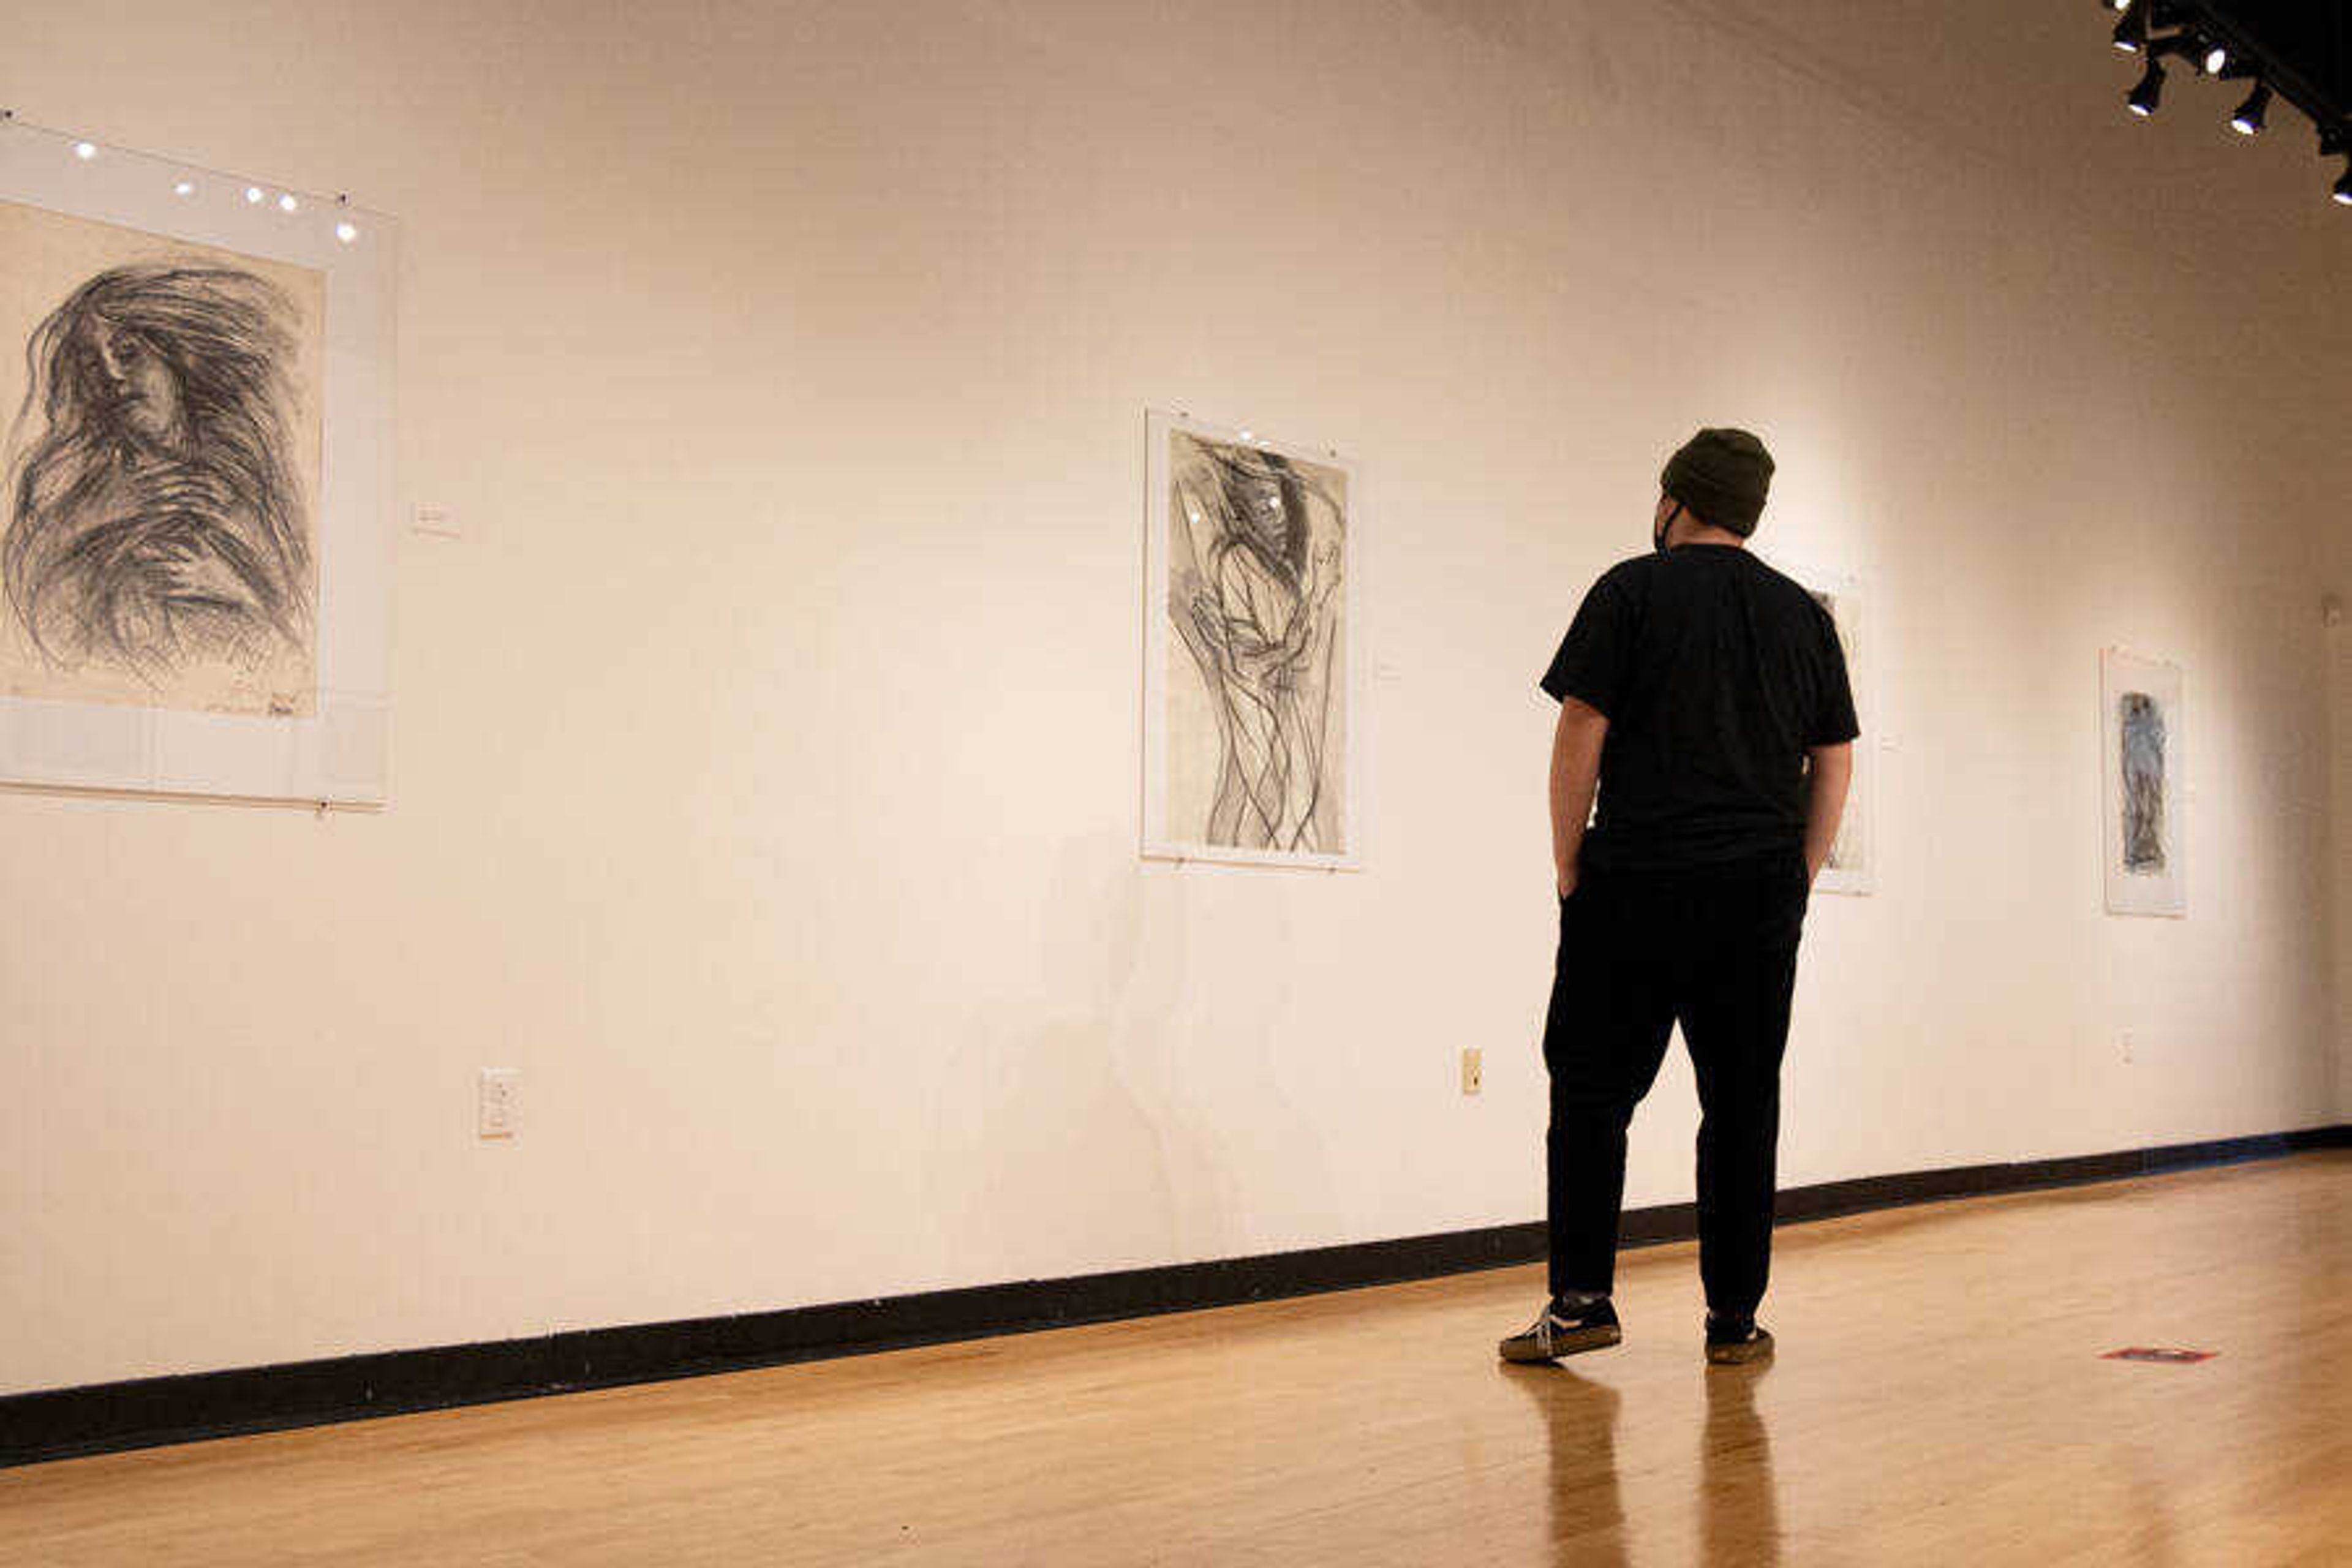 Art From the Heart: An exhibit informed by emotion and history